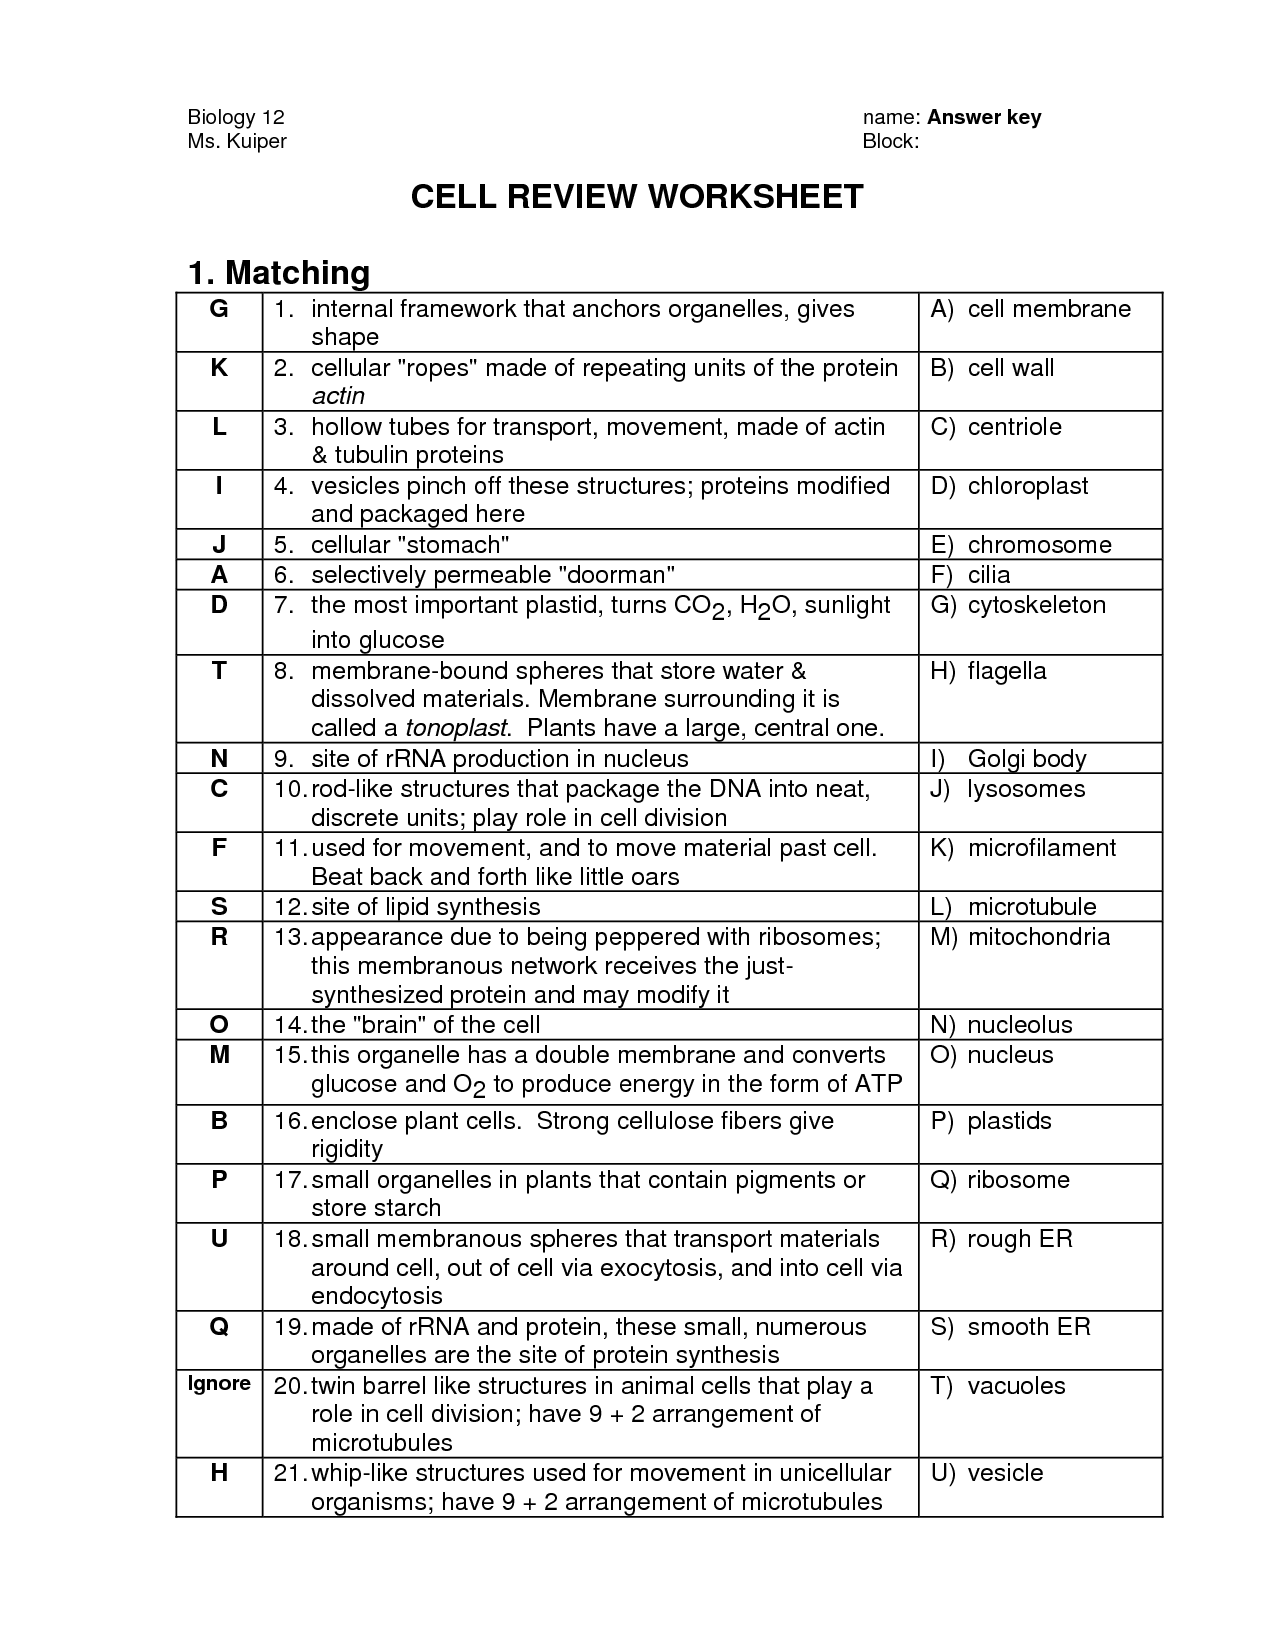 Biology Cell Organelles Worksheet Answers